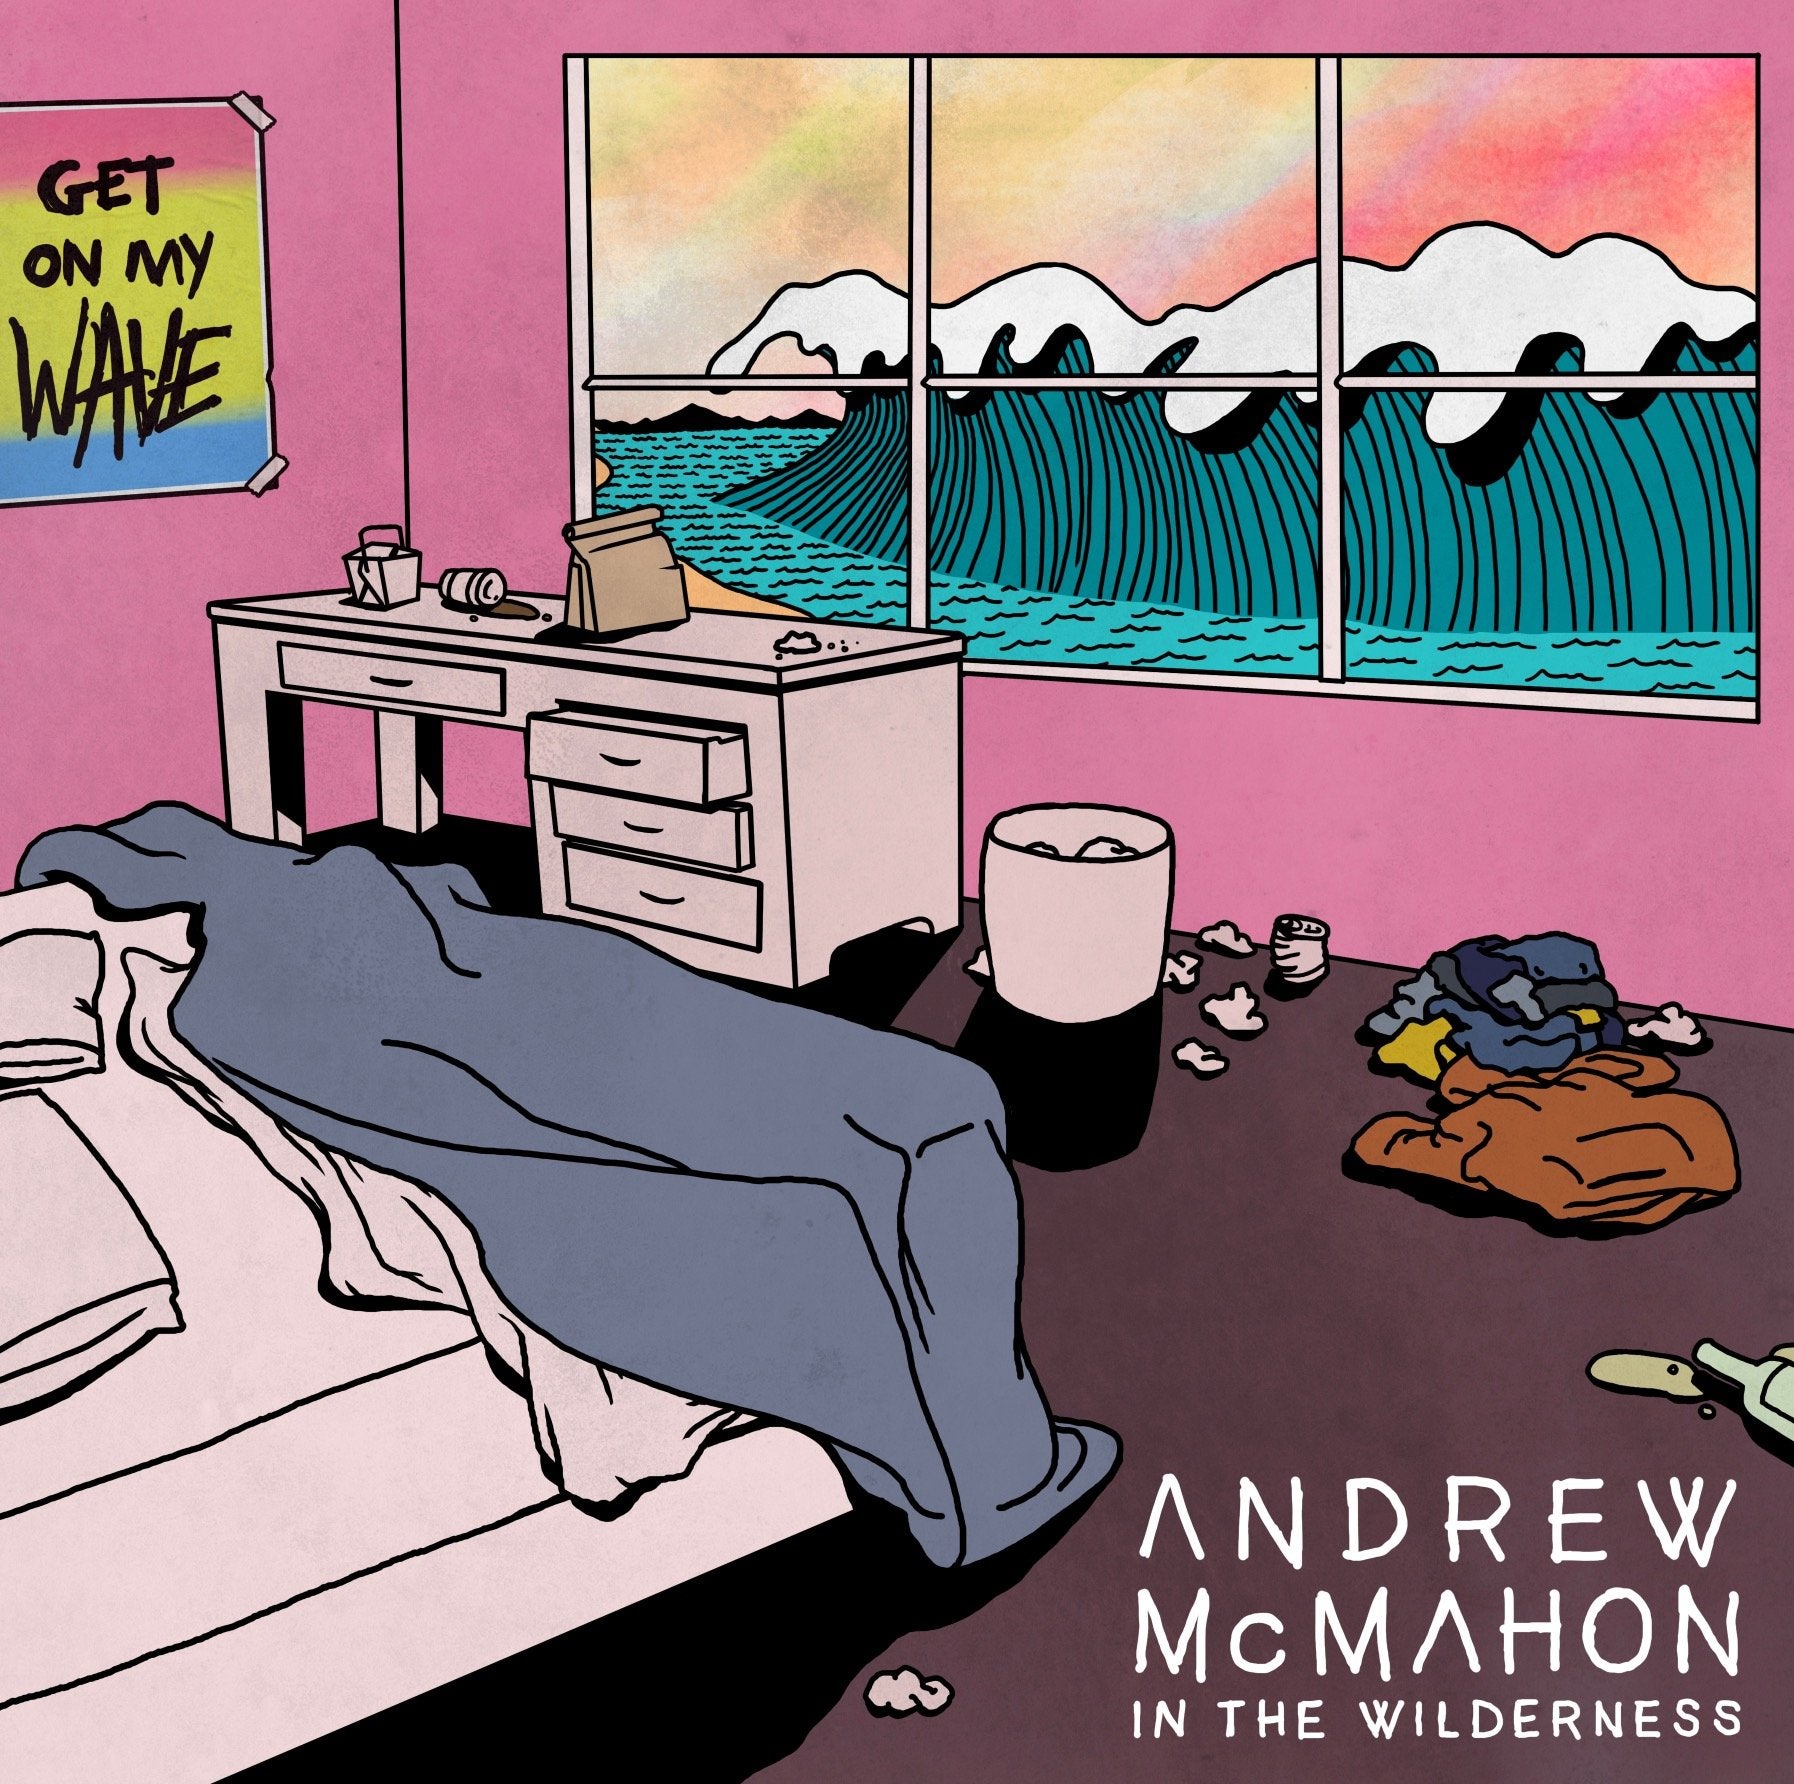 New Song: "Get On My Wave" - Out Now